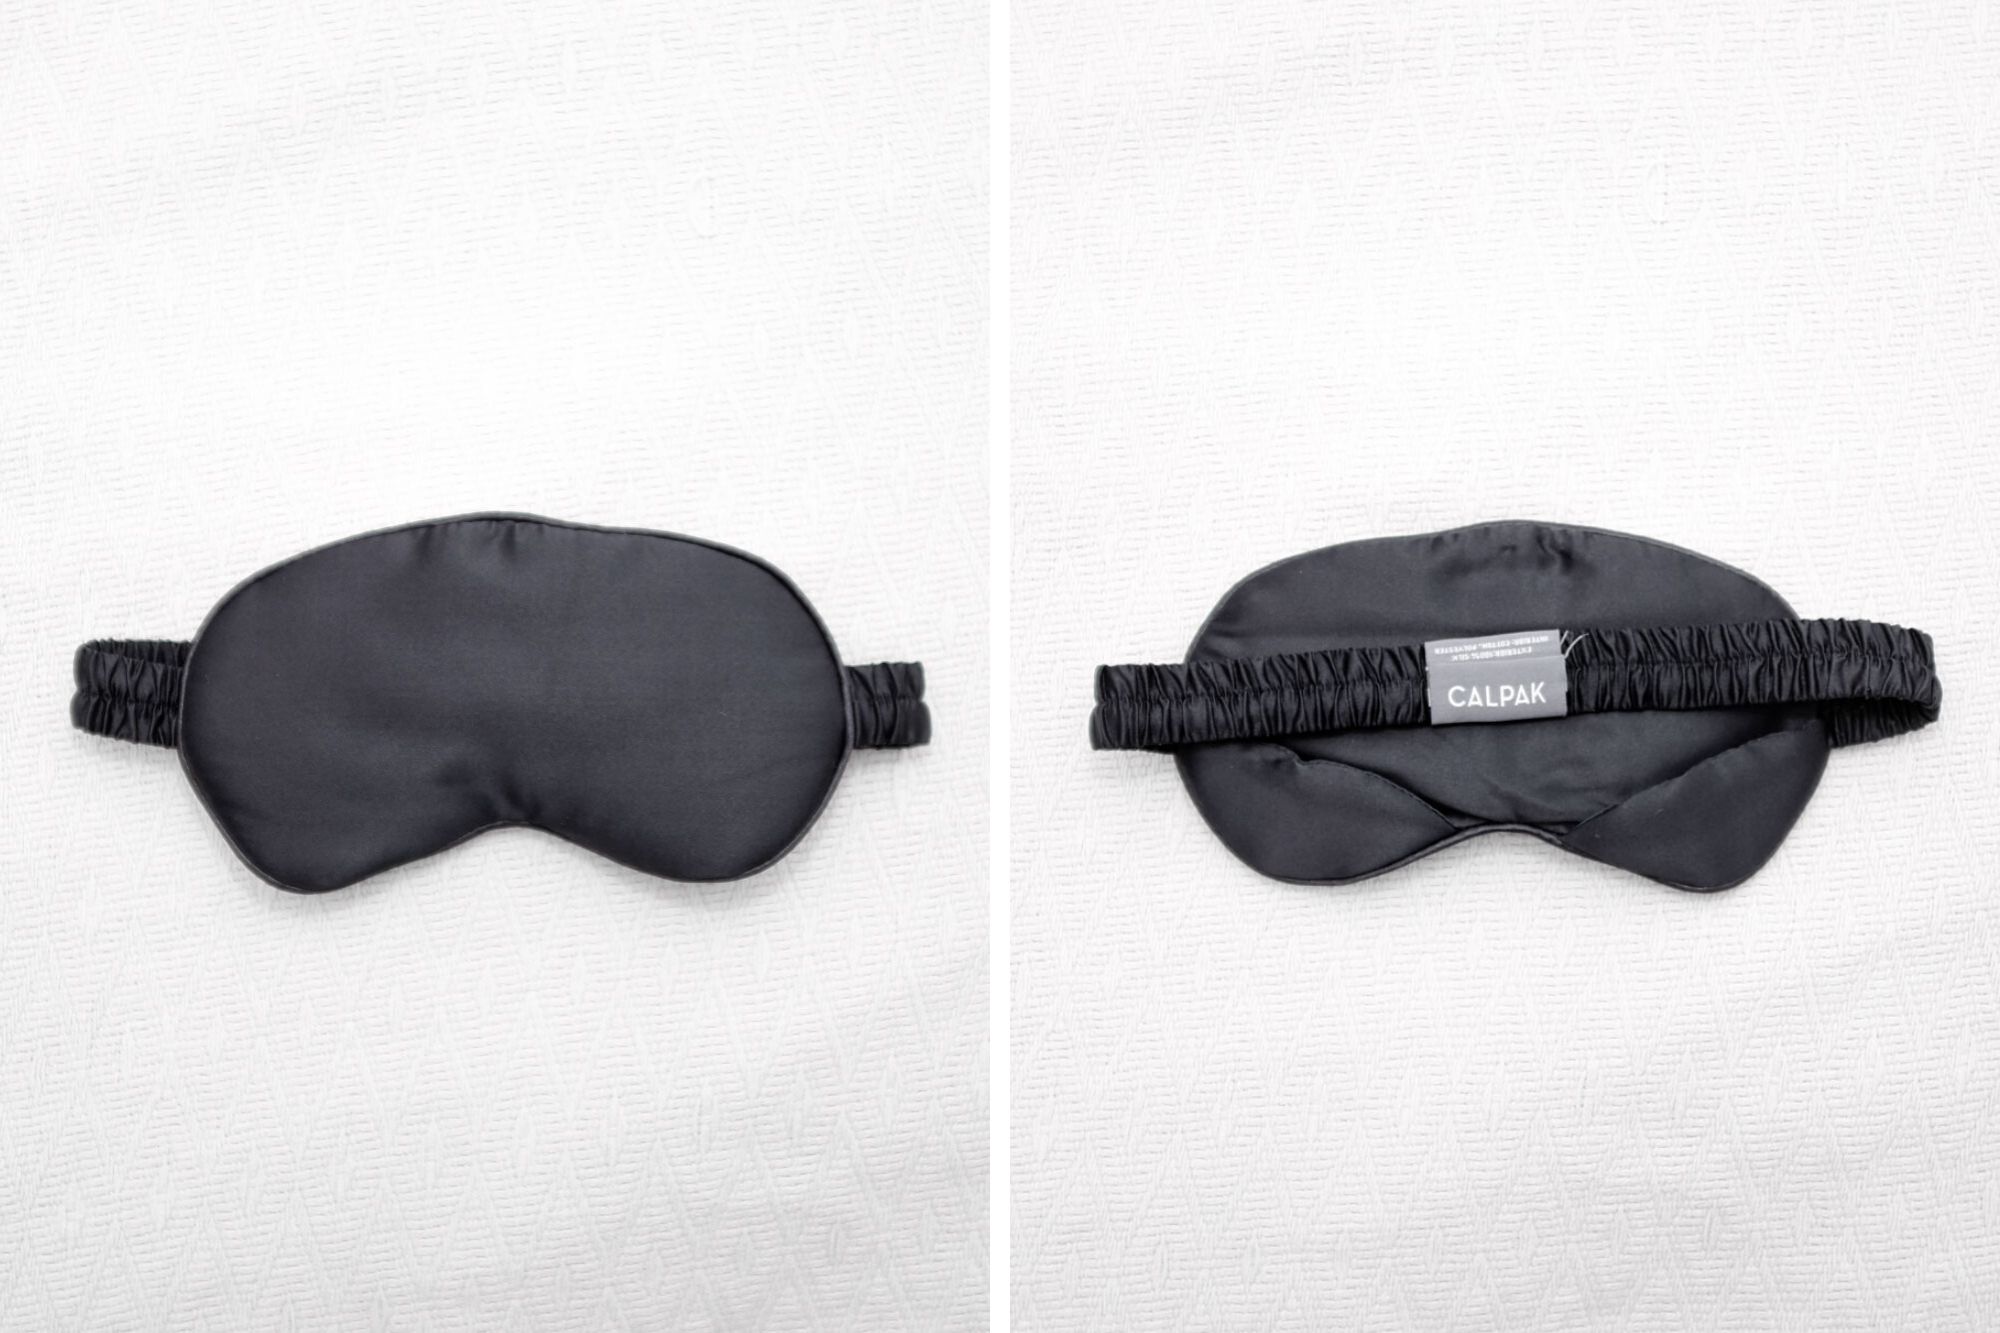 Collage of two images: one of the front of the black silk eye mask, and one of the back, which shows the strap and the CALPAK tag.